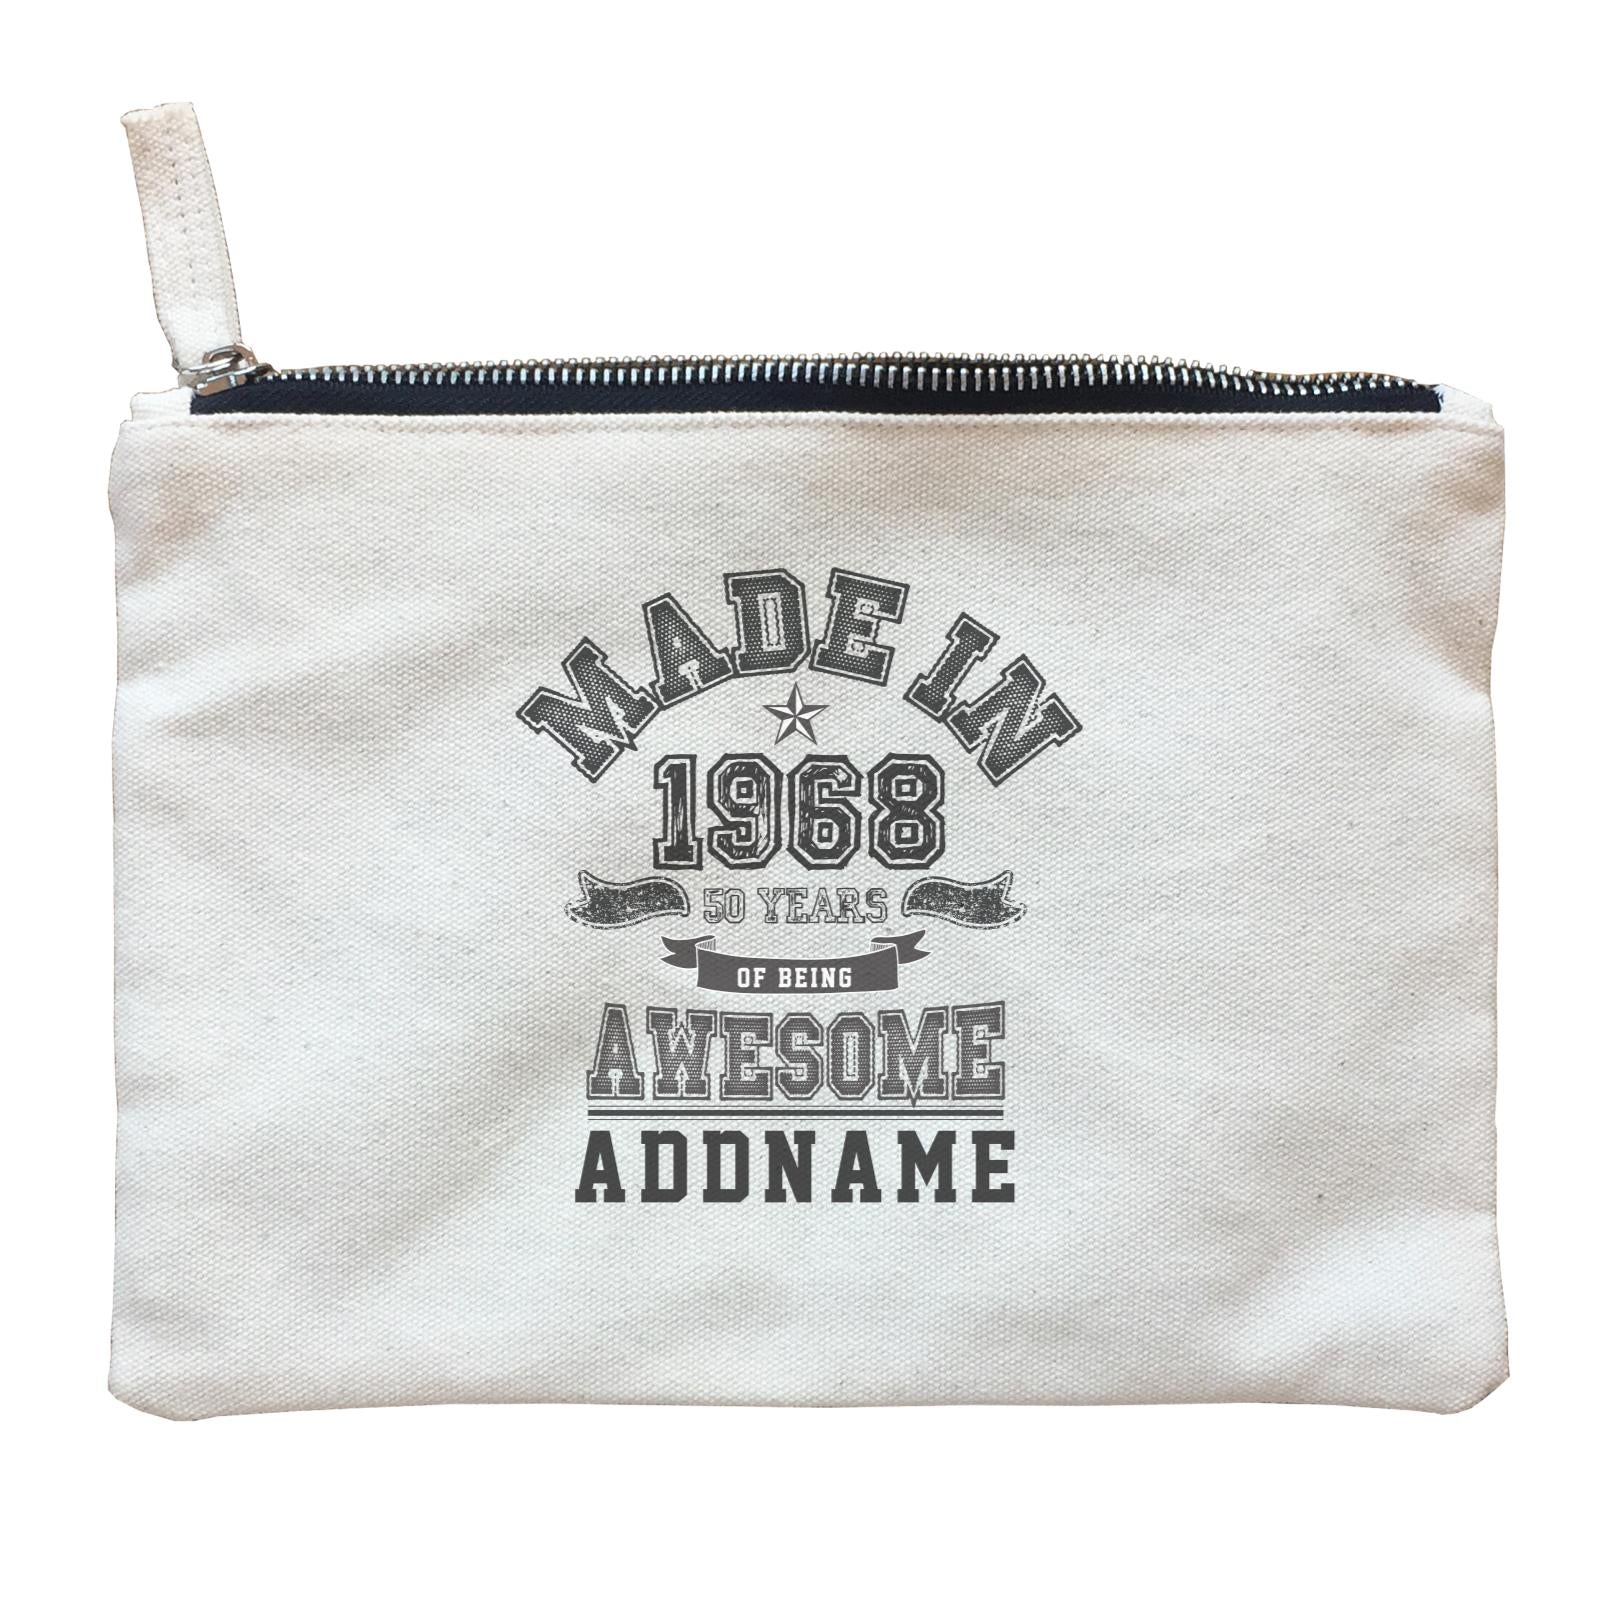 Personalize It Birthyear Made In Years Awesome with Addname and Add Year Zipper Pouch